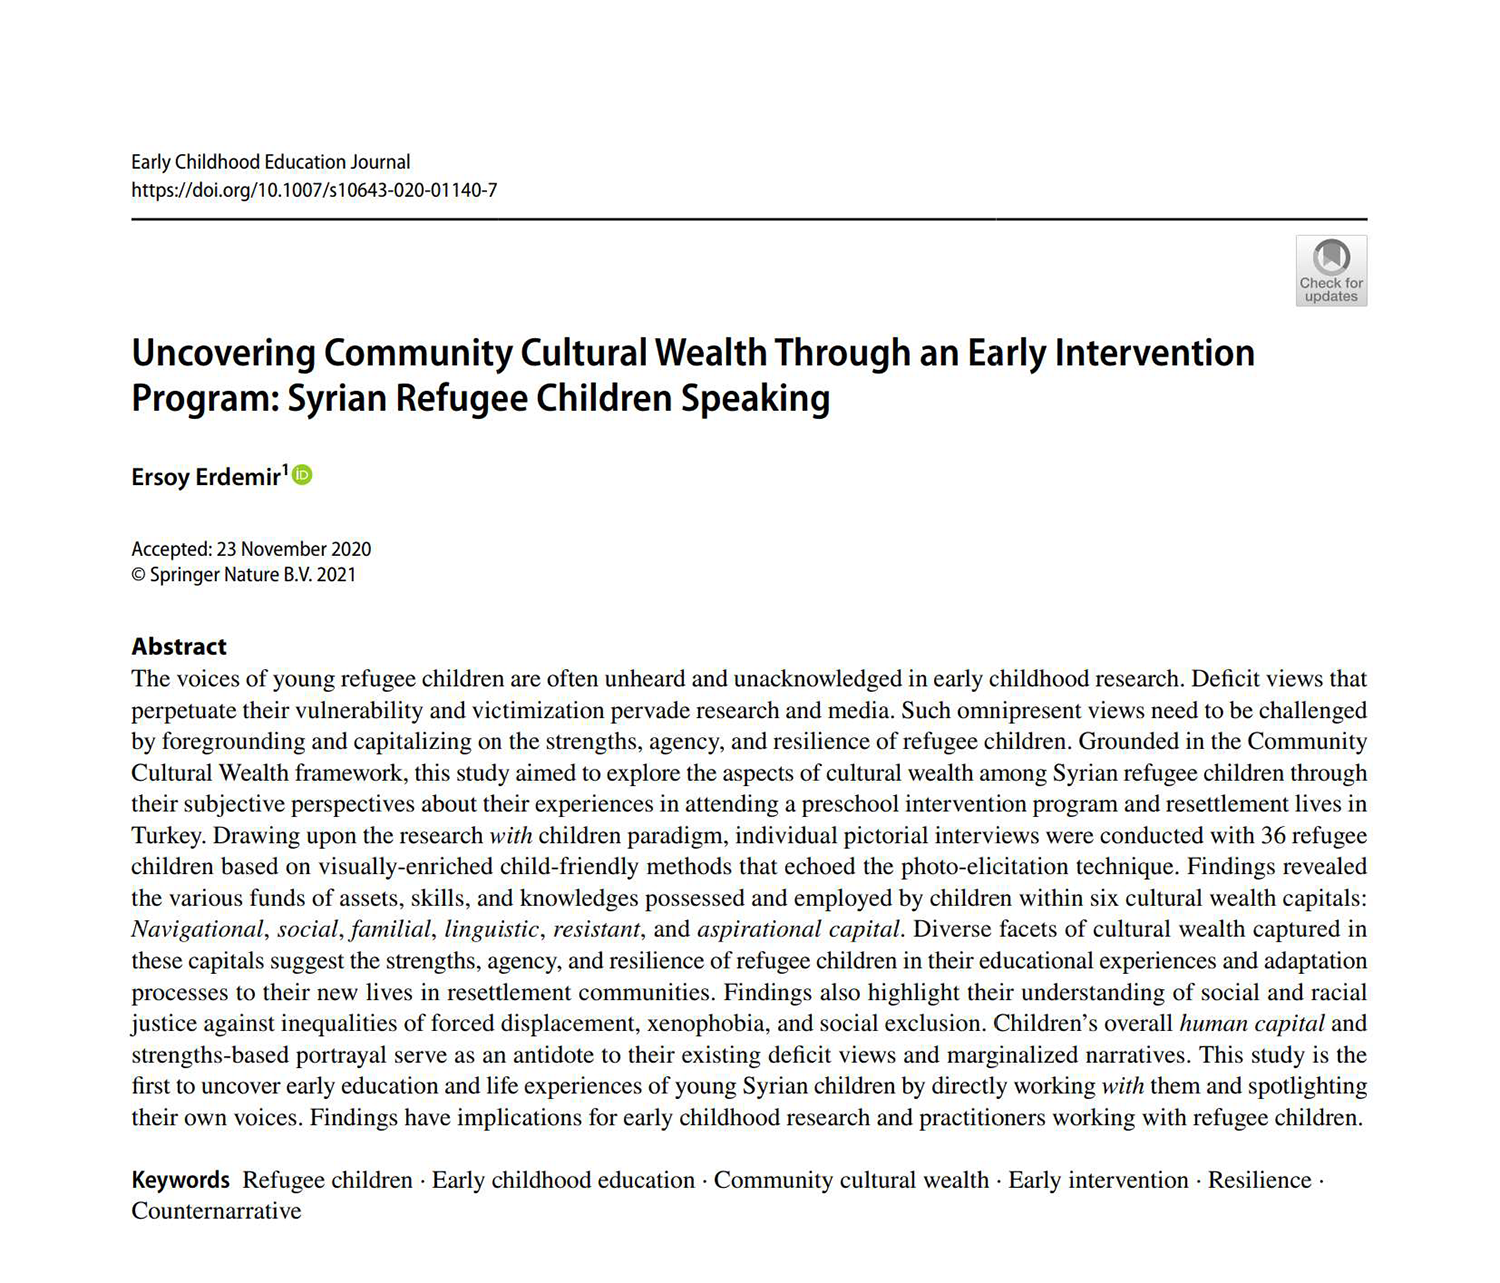 Uncovering Community Cultural Wealth Through an Early Intervention Program: Syrian Refugee Children Speaking